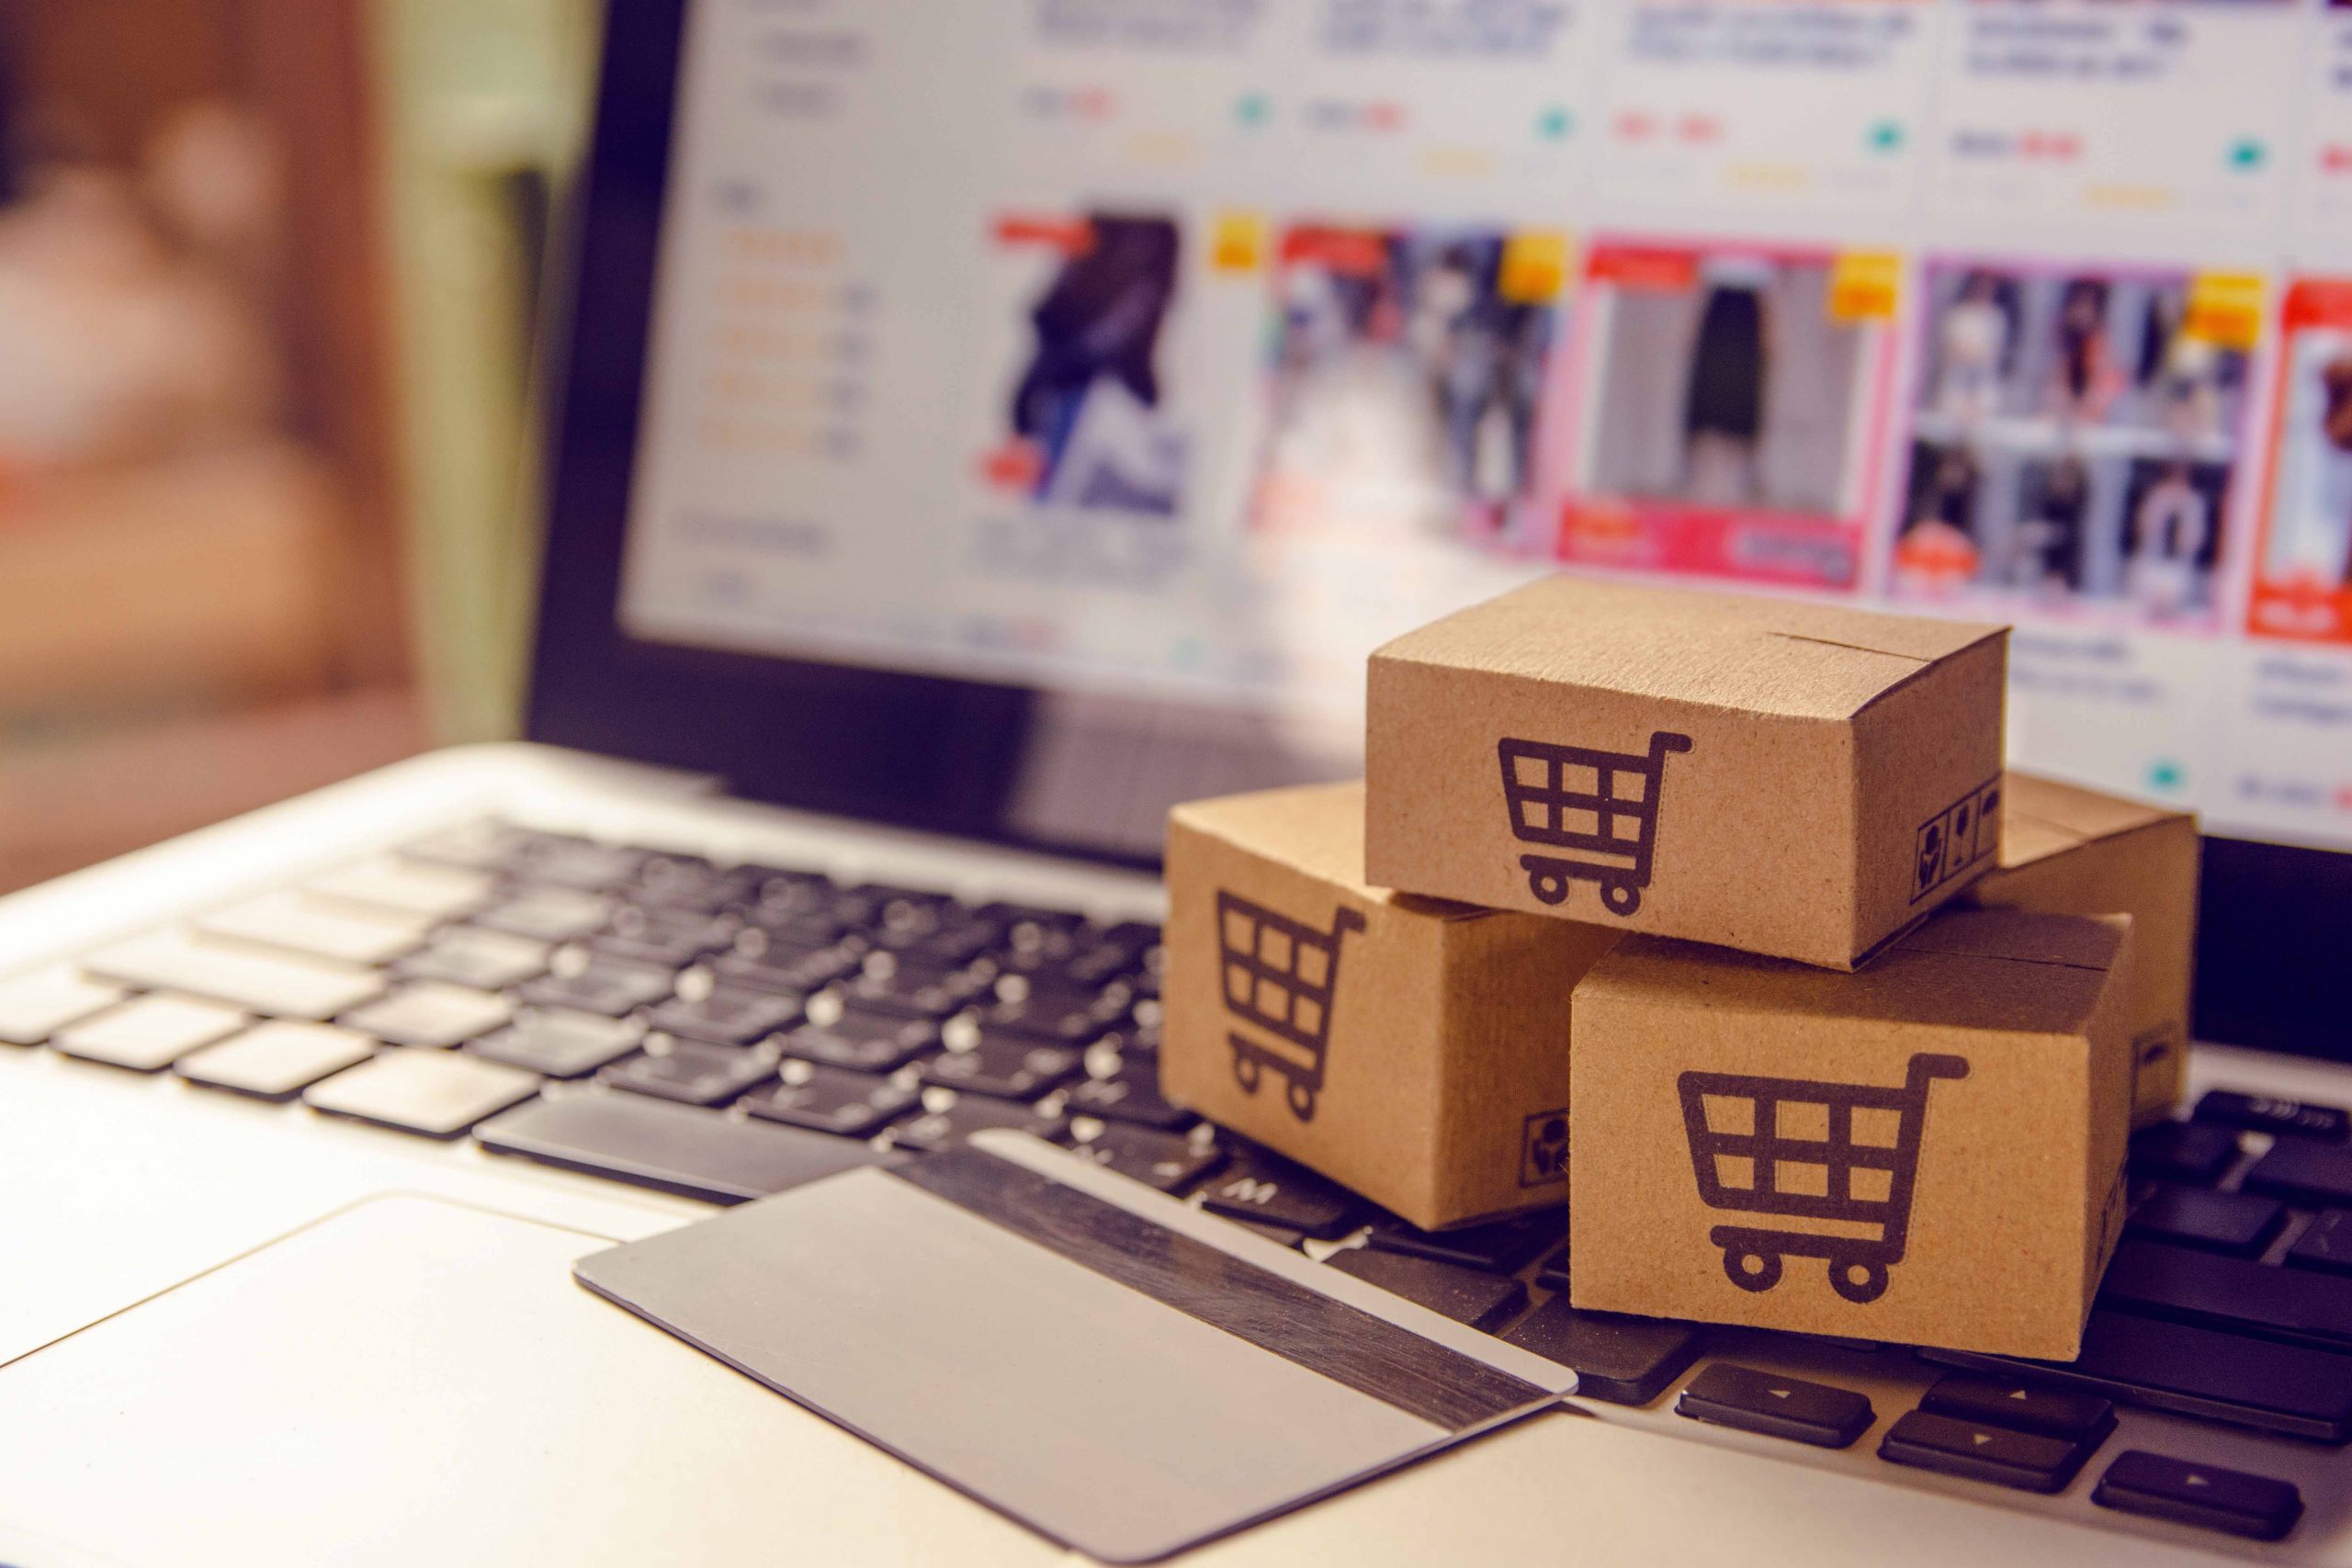 Growth in ecommerce shopping 2020